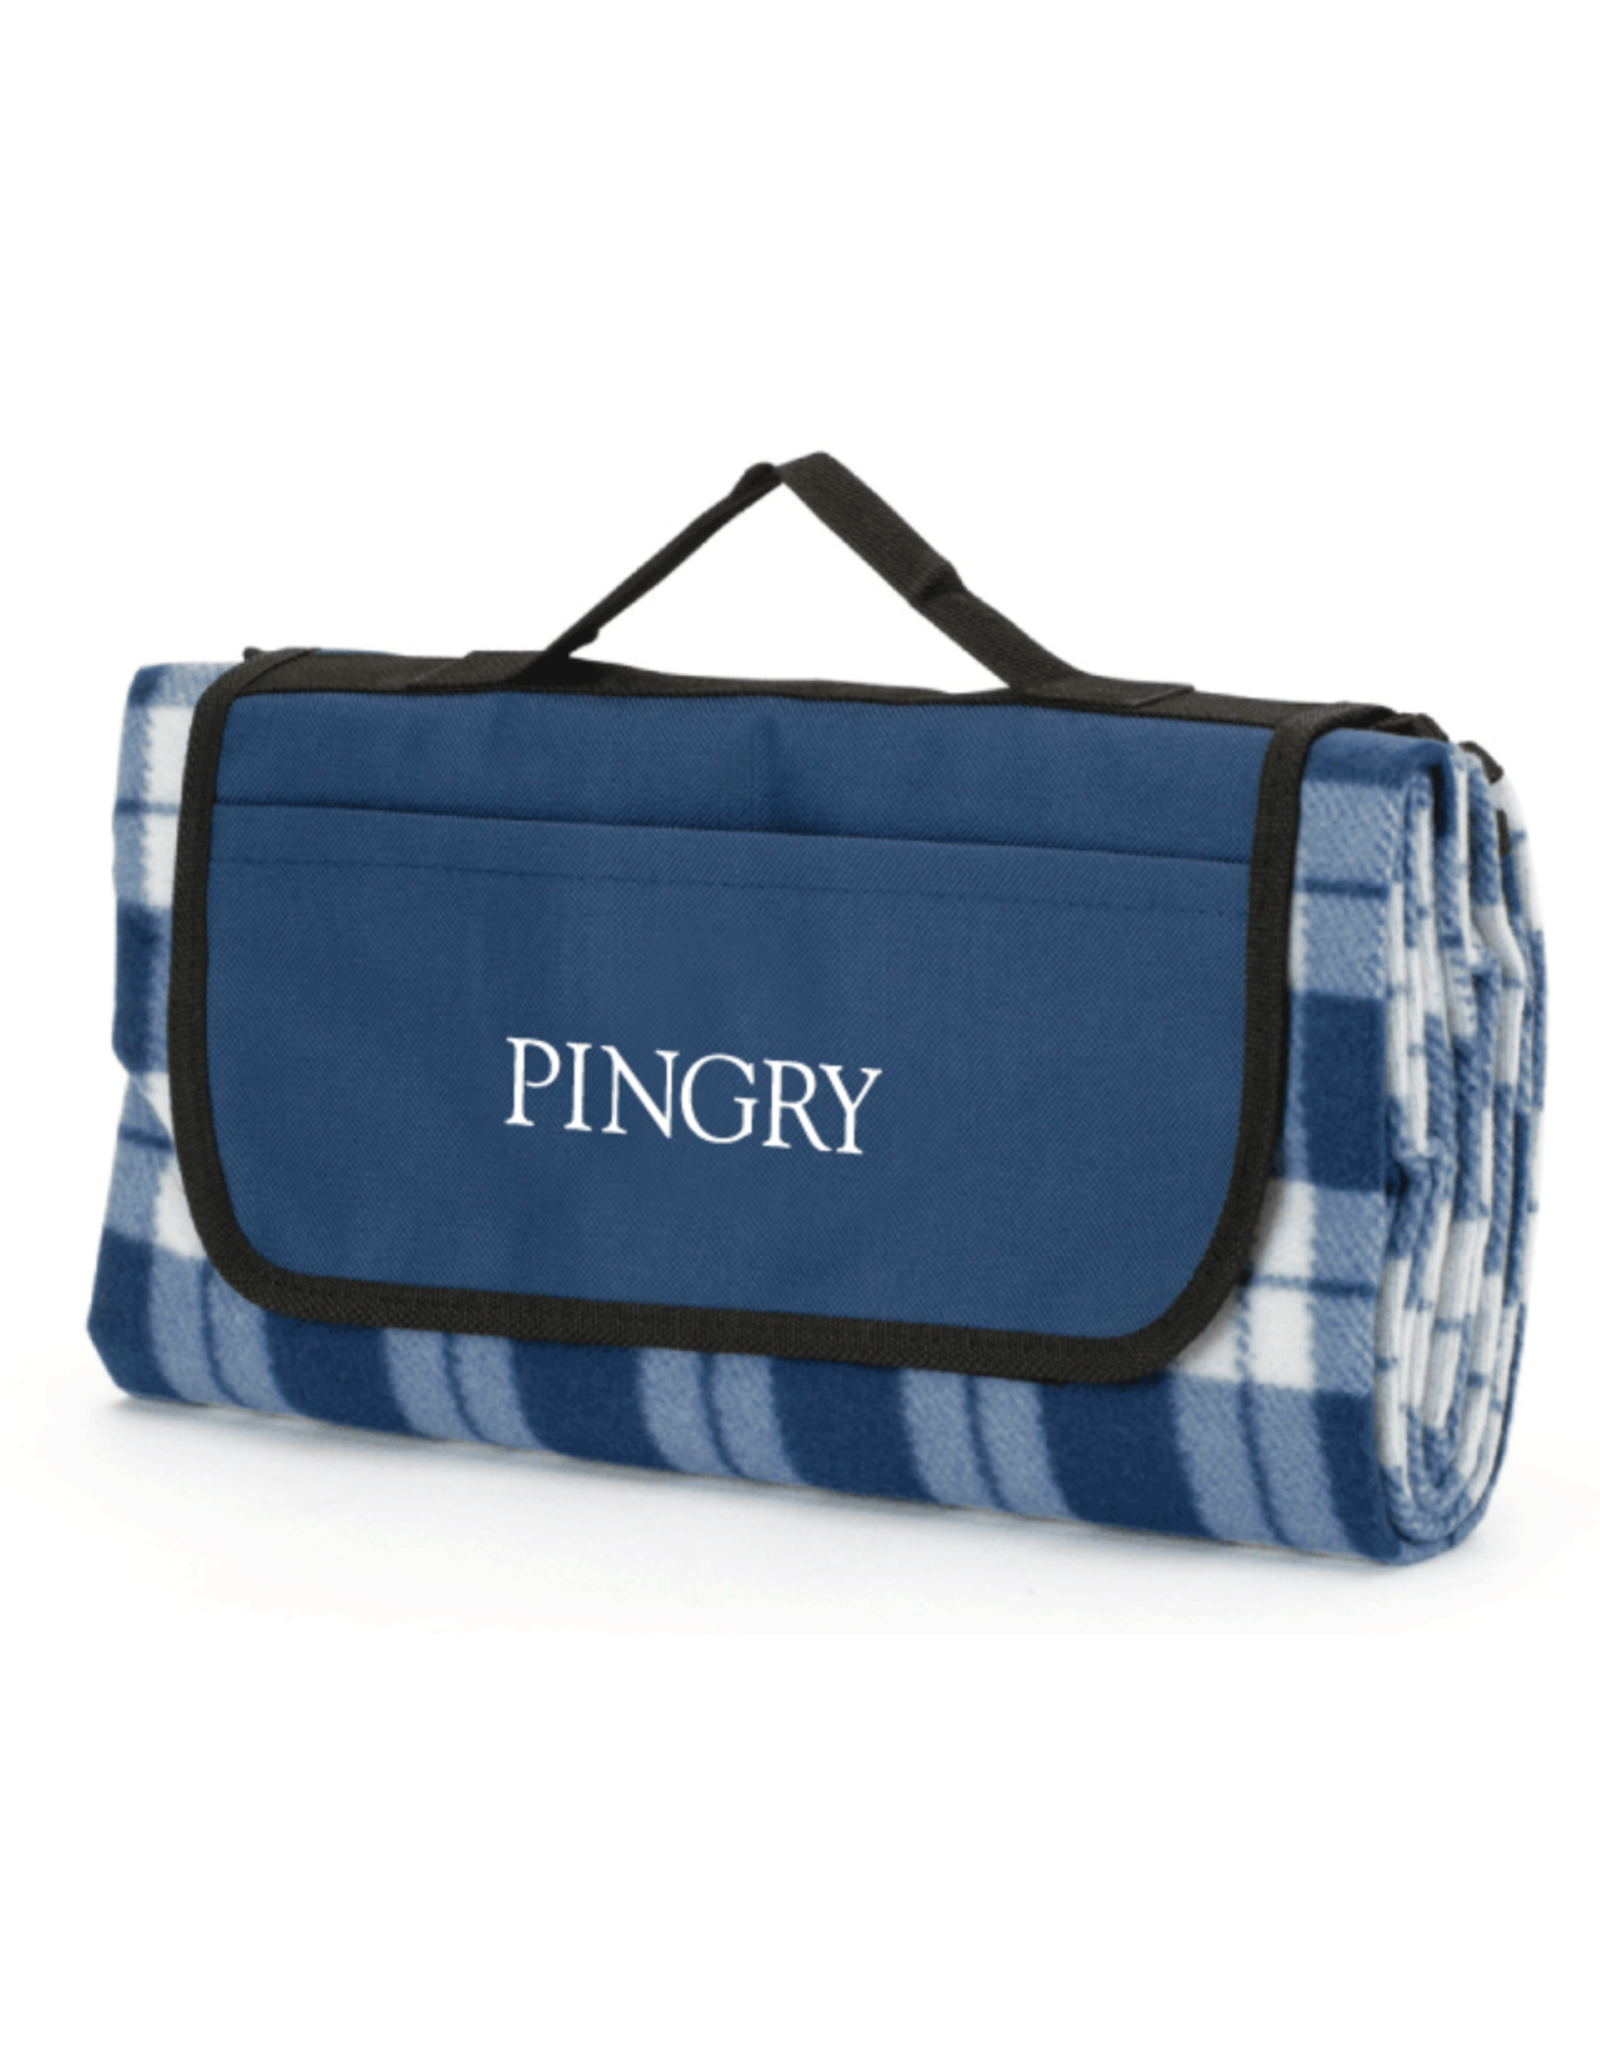 Pingry Picnic Blanket